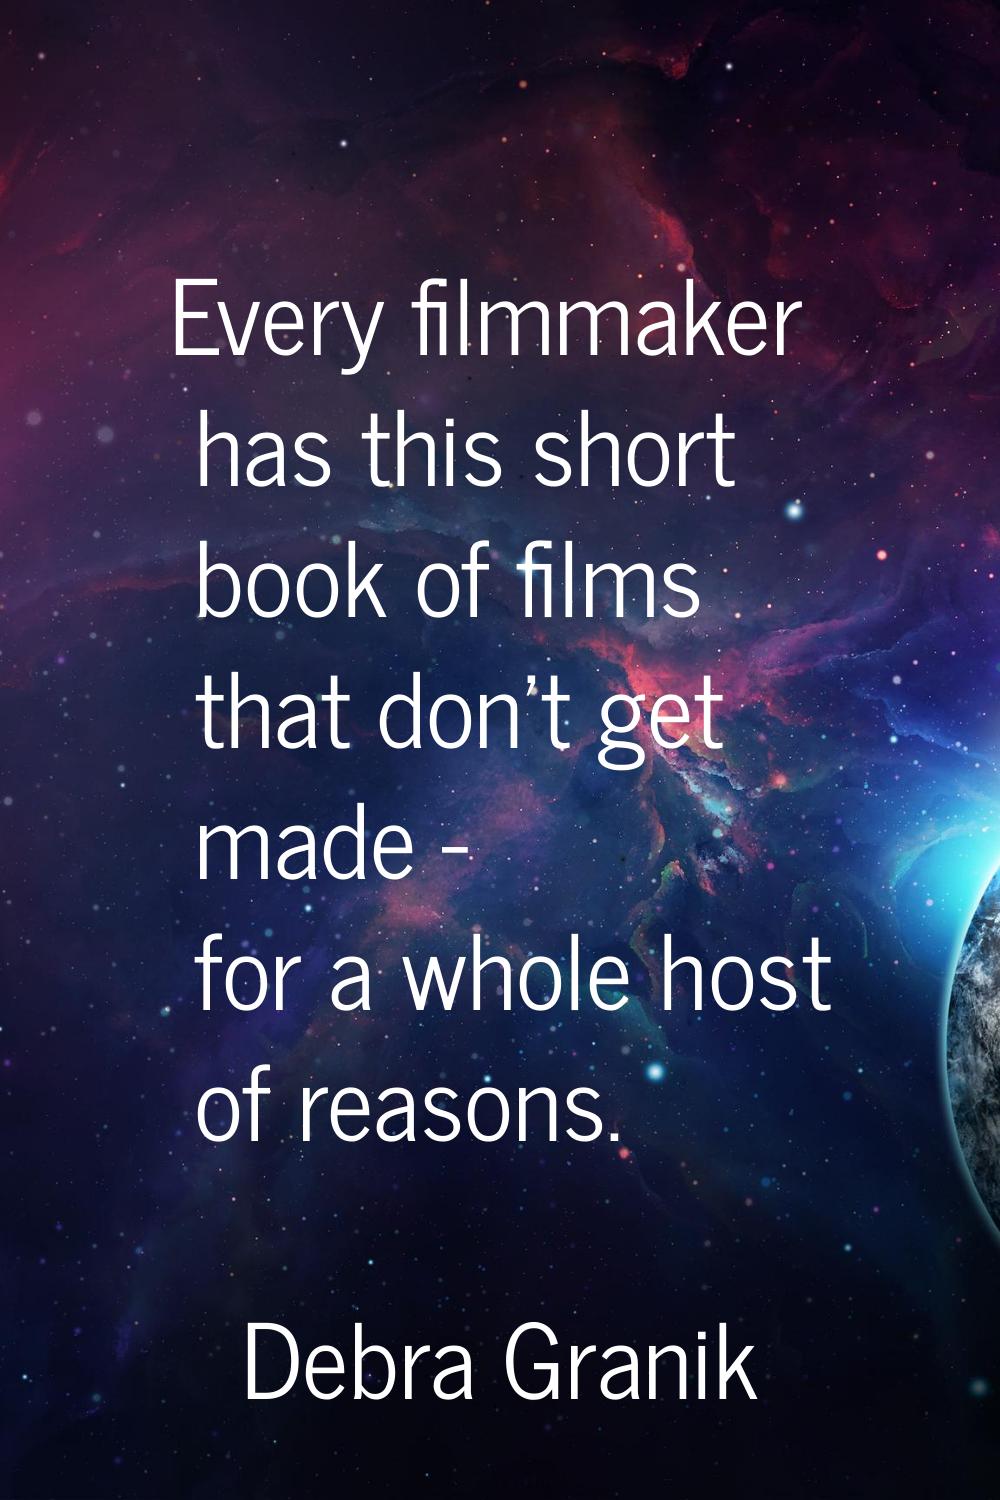 Every filmmaker has this short book of films that don't get made - for a whole host of reasons.